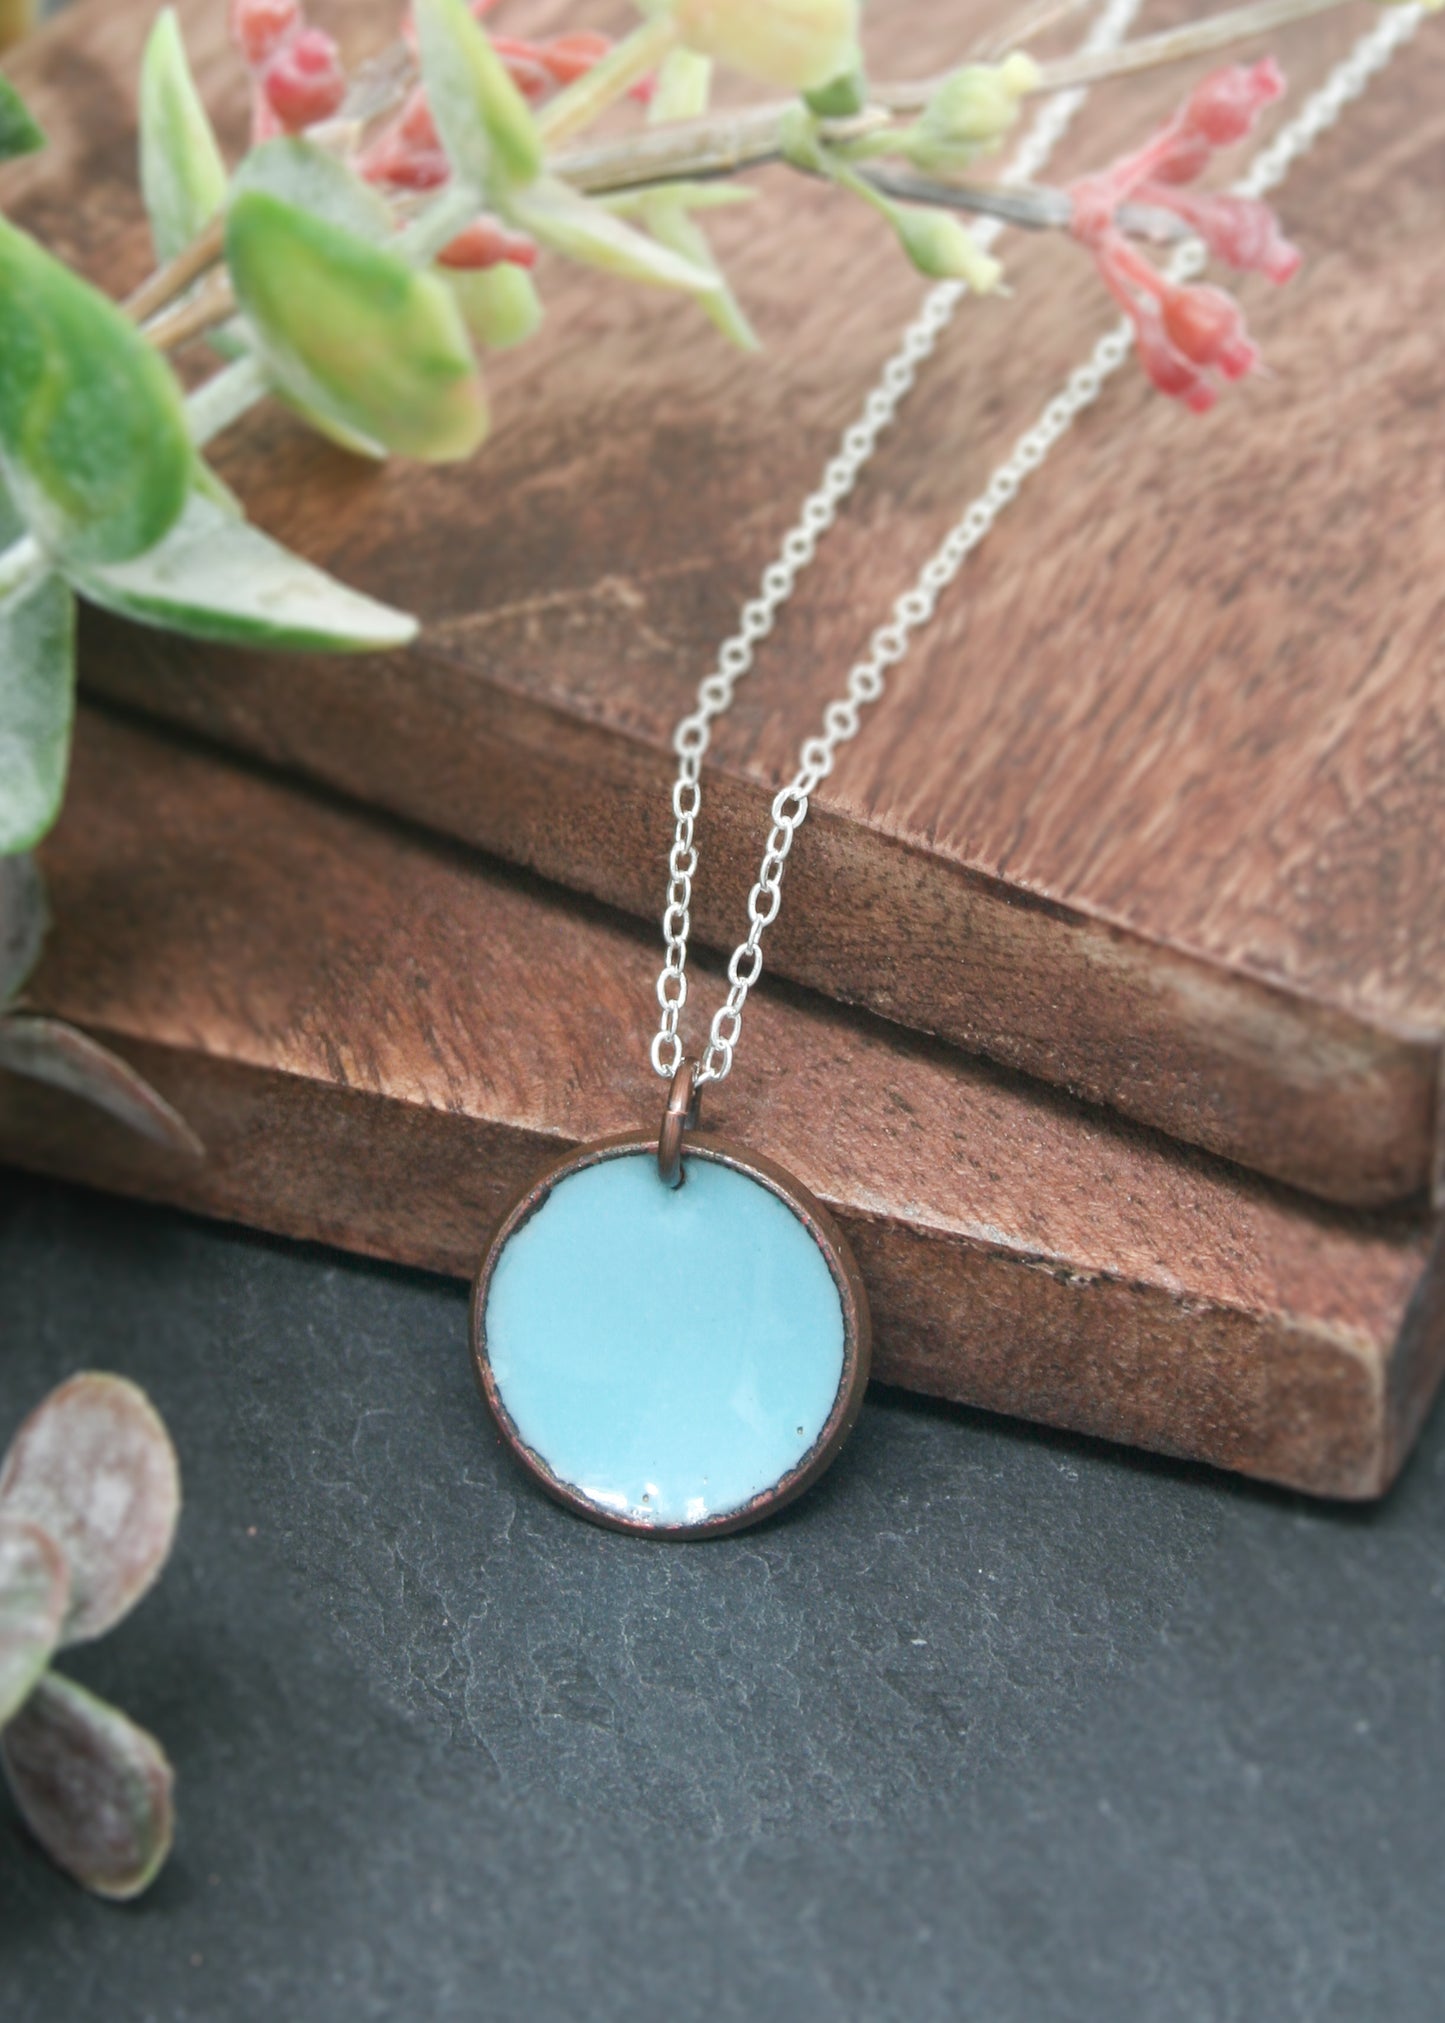 Robin's Egg Enameled penny pendant necklace [ready to ship]